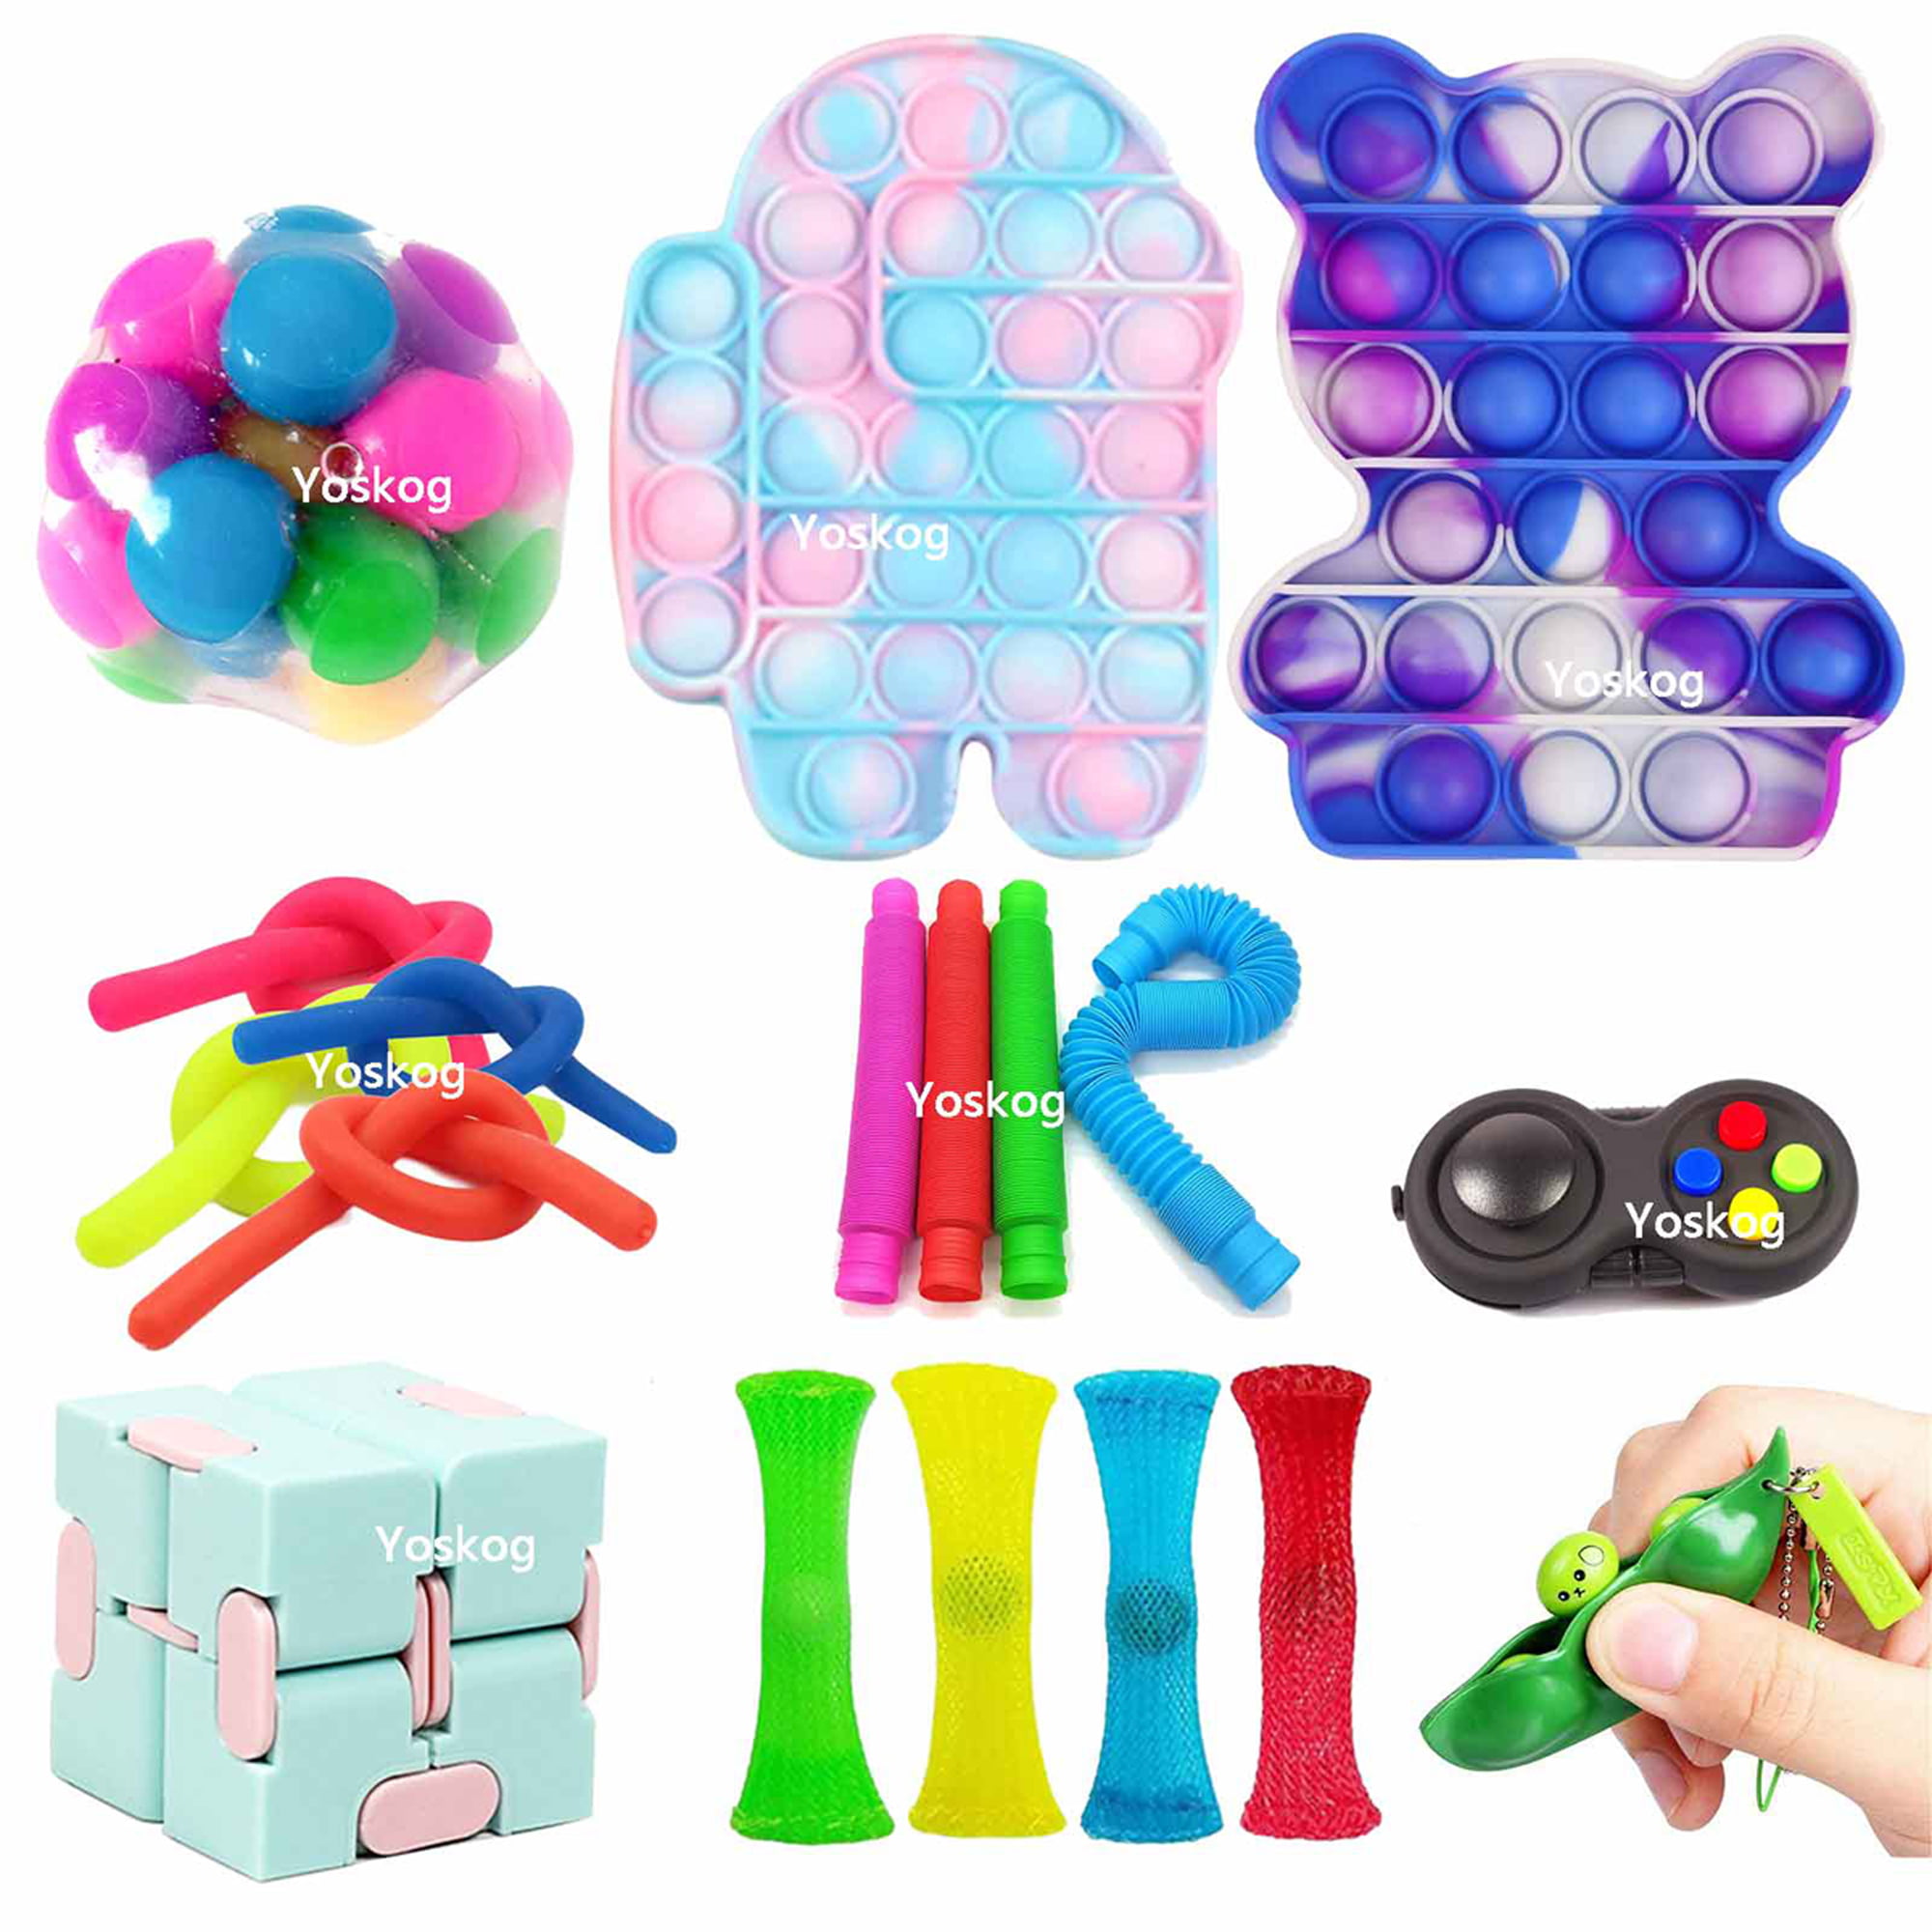 Yoskog Fidget Toy Pack Pop Bubble Cheap Sensory Fidget Toy Set Stress Relief Toys with Marble Mesh Pop Anxiety Tube for Kids Adult Fidget Toy-20